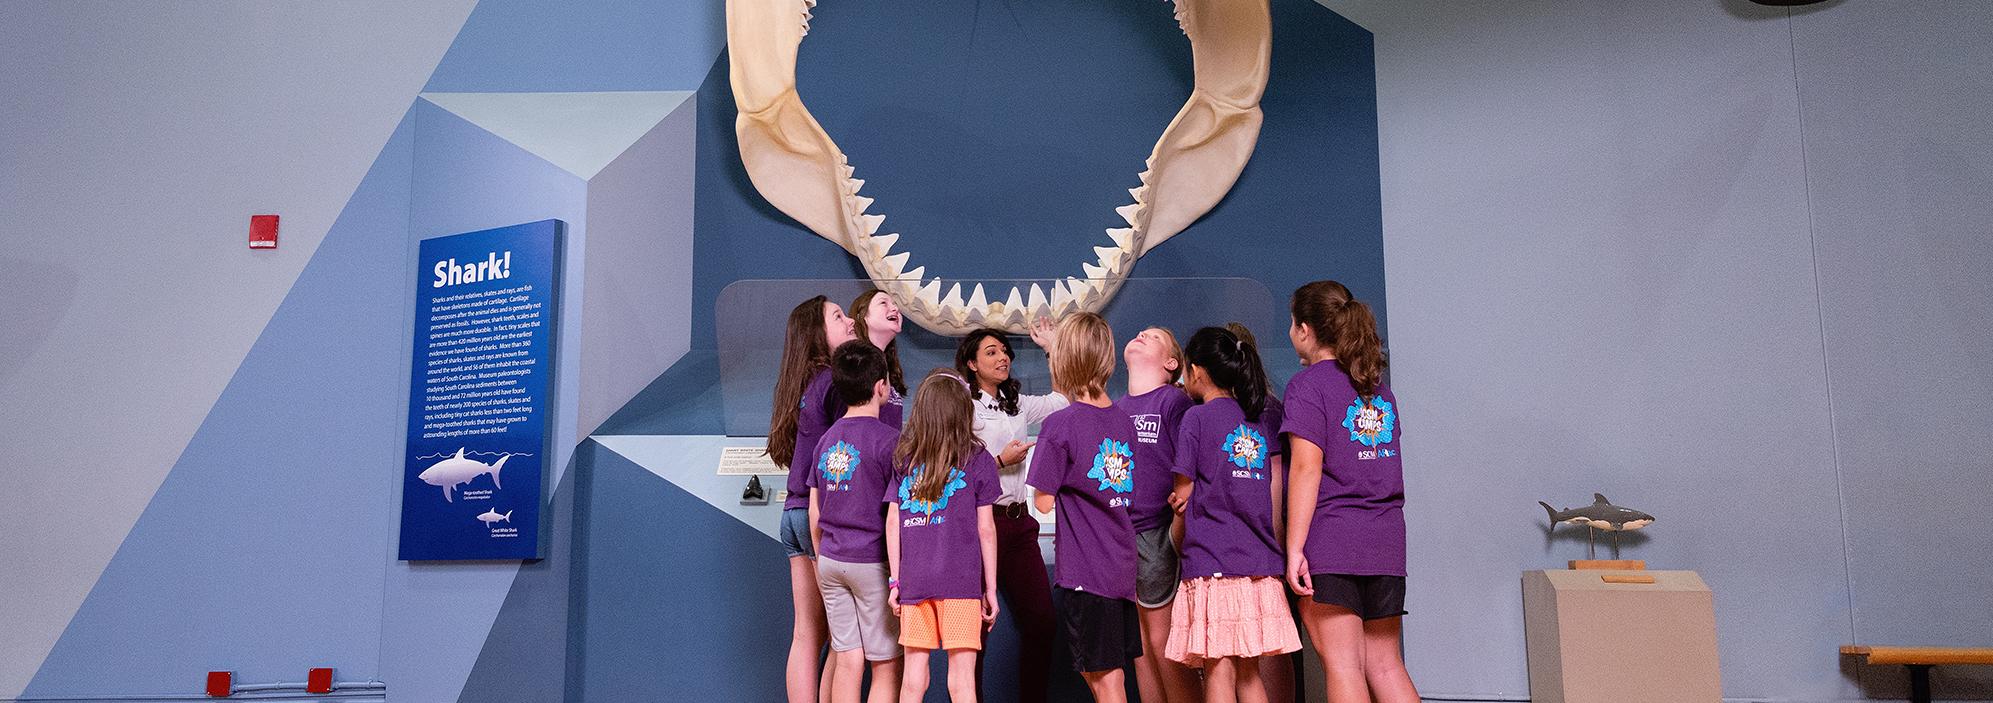 Group of students in purple shirts stand with adult educator with giant shark jaw mounted on wall behind them.